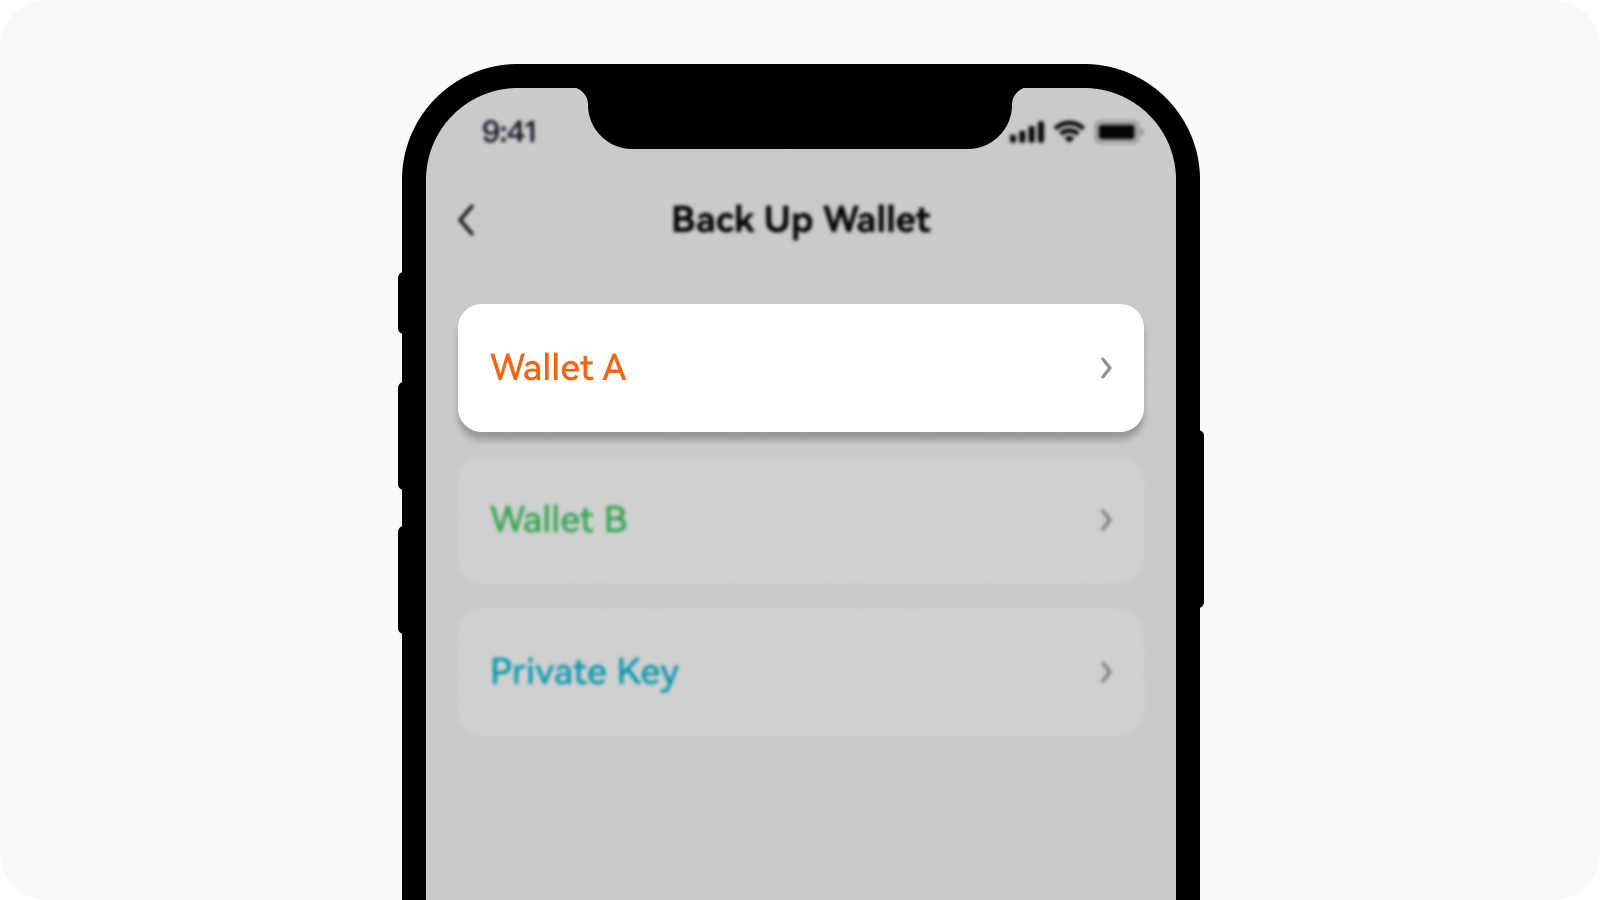 CT-App-web3-select seed phrase wallet to back up